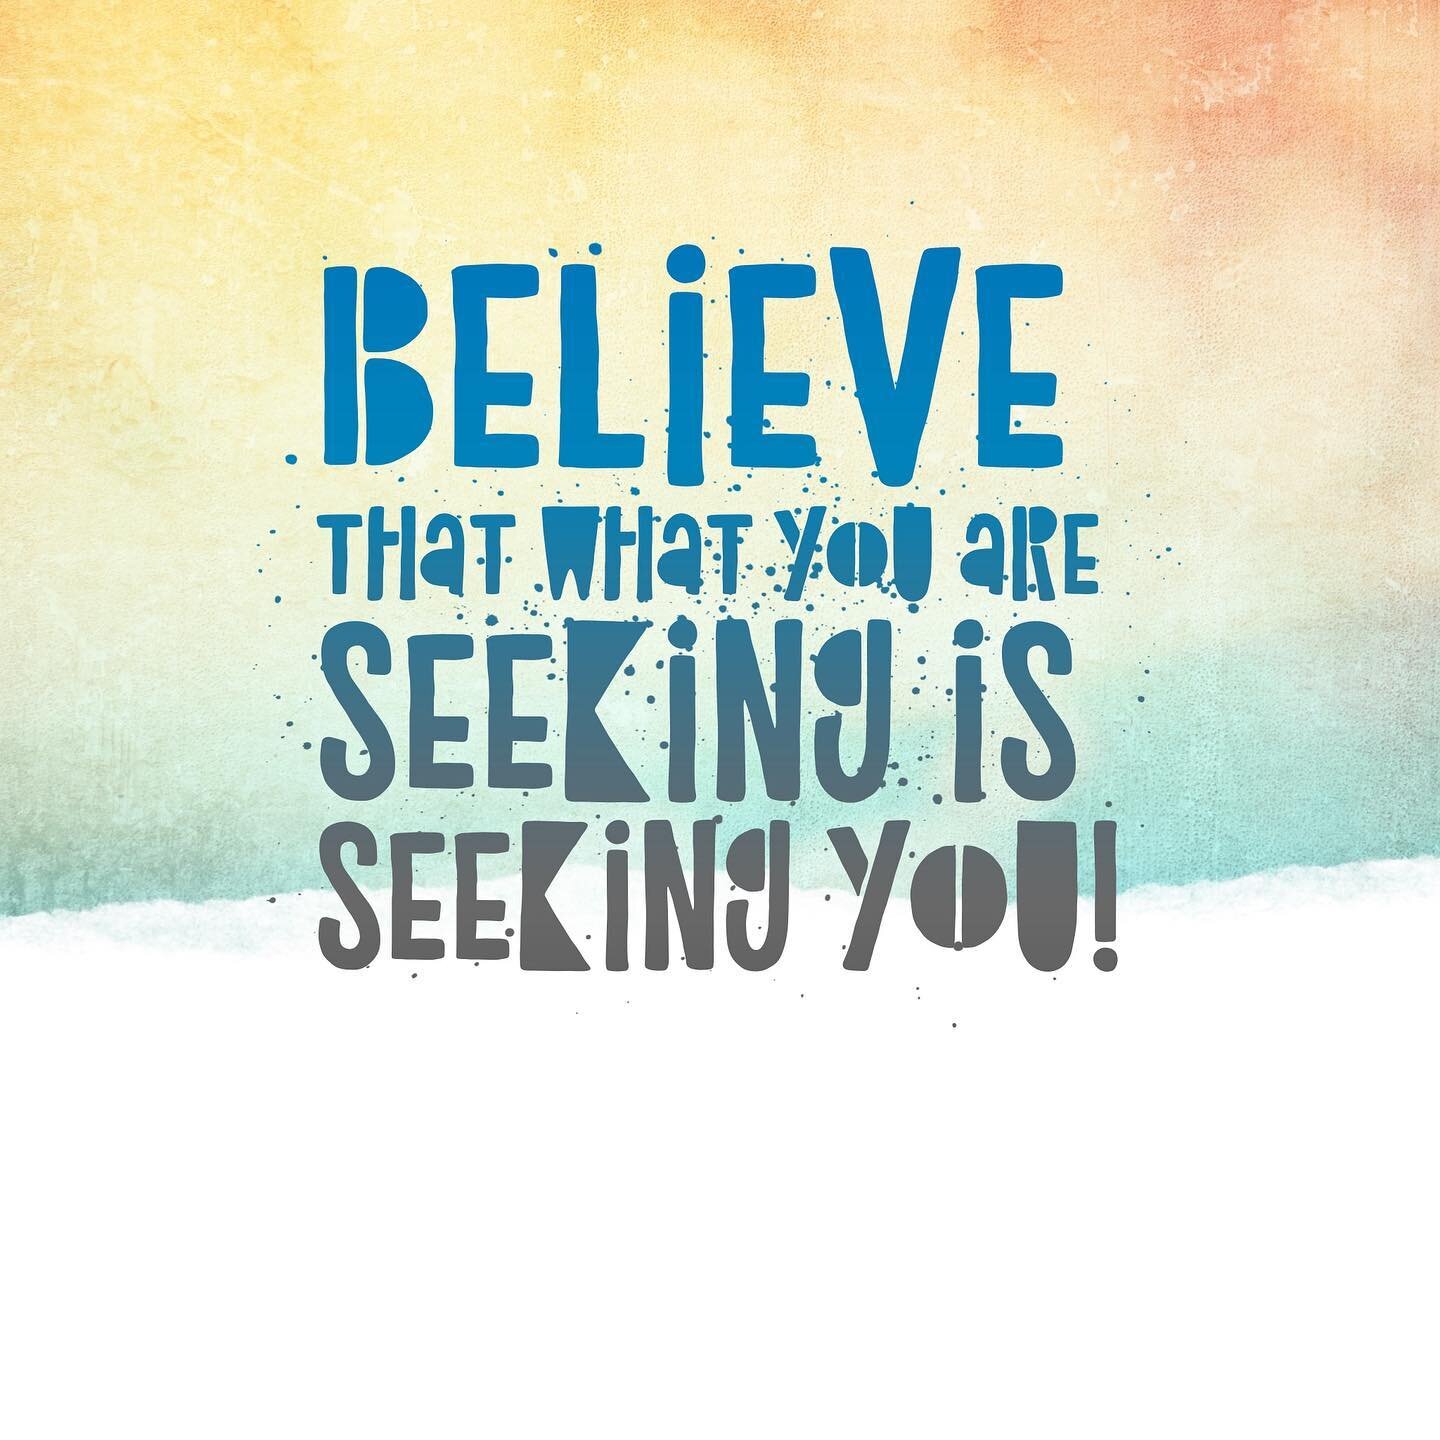 Believe that what you are seeking is also seeking you.